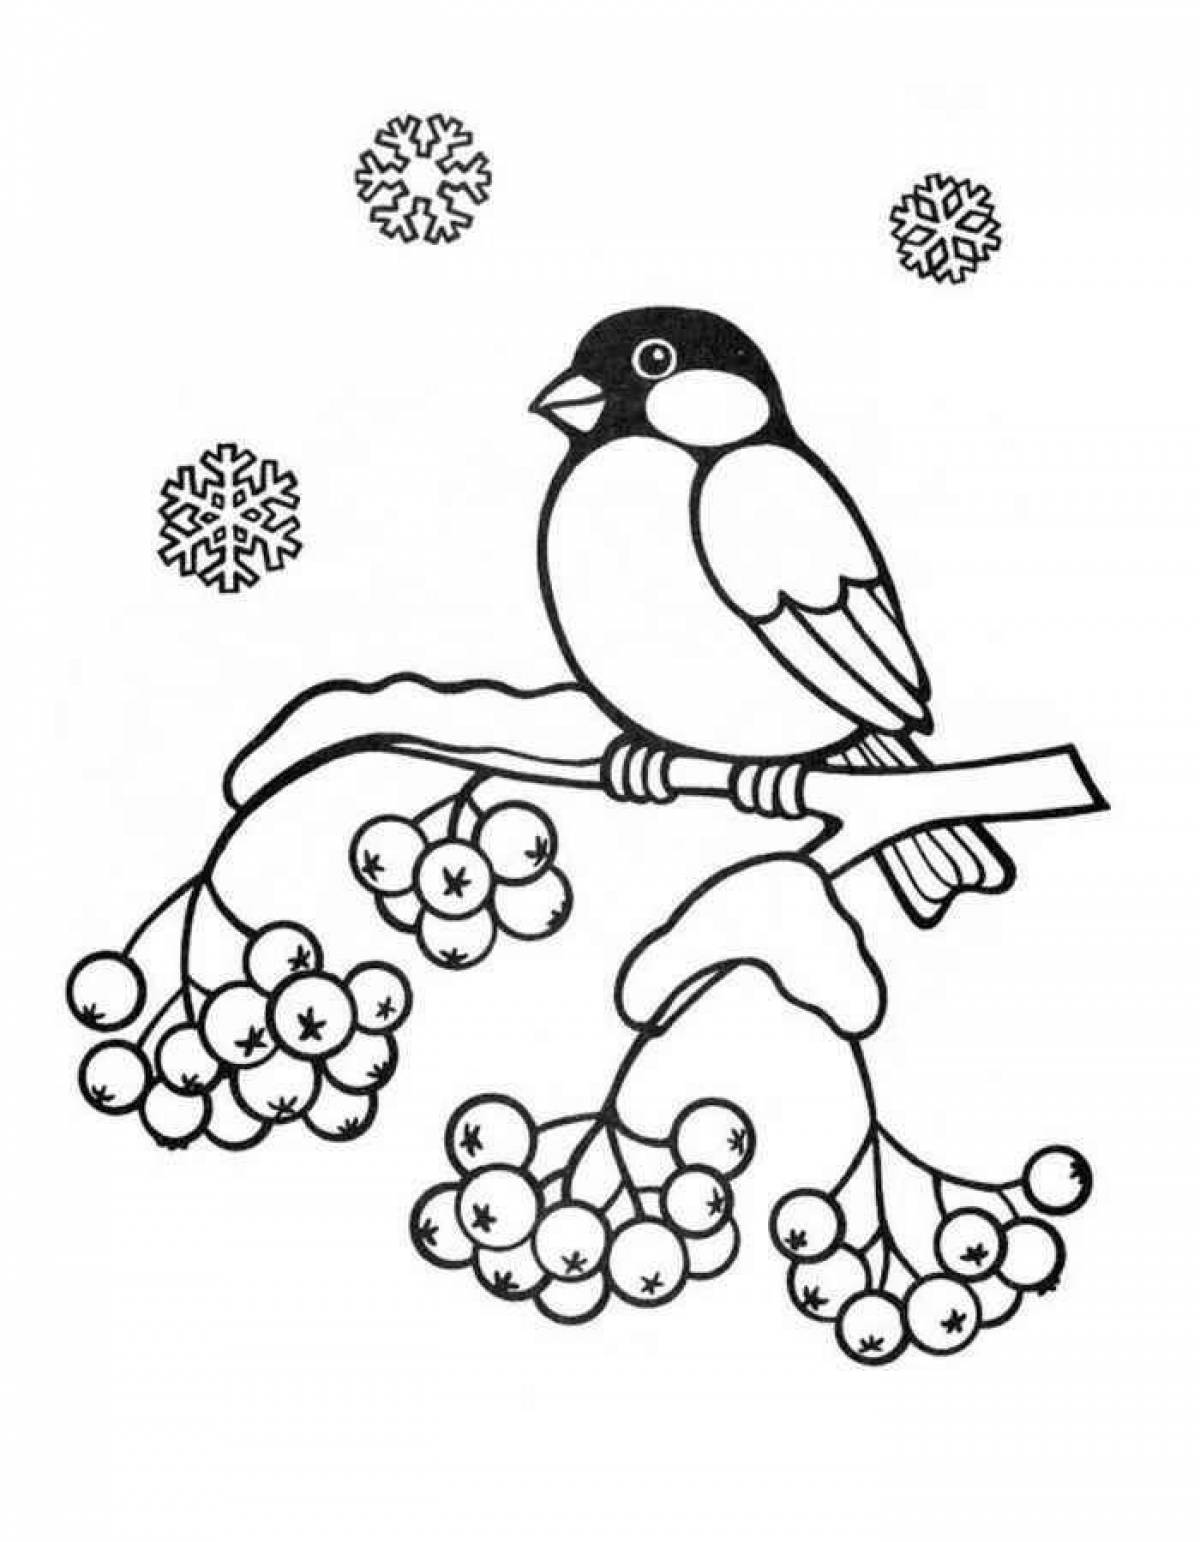 Coloring book of glorious wintering birds for children 3-4 years old